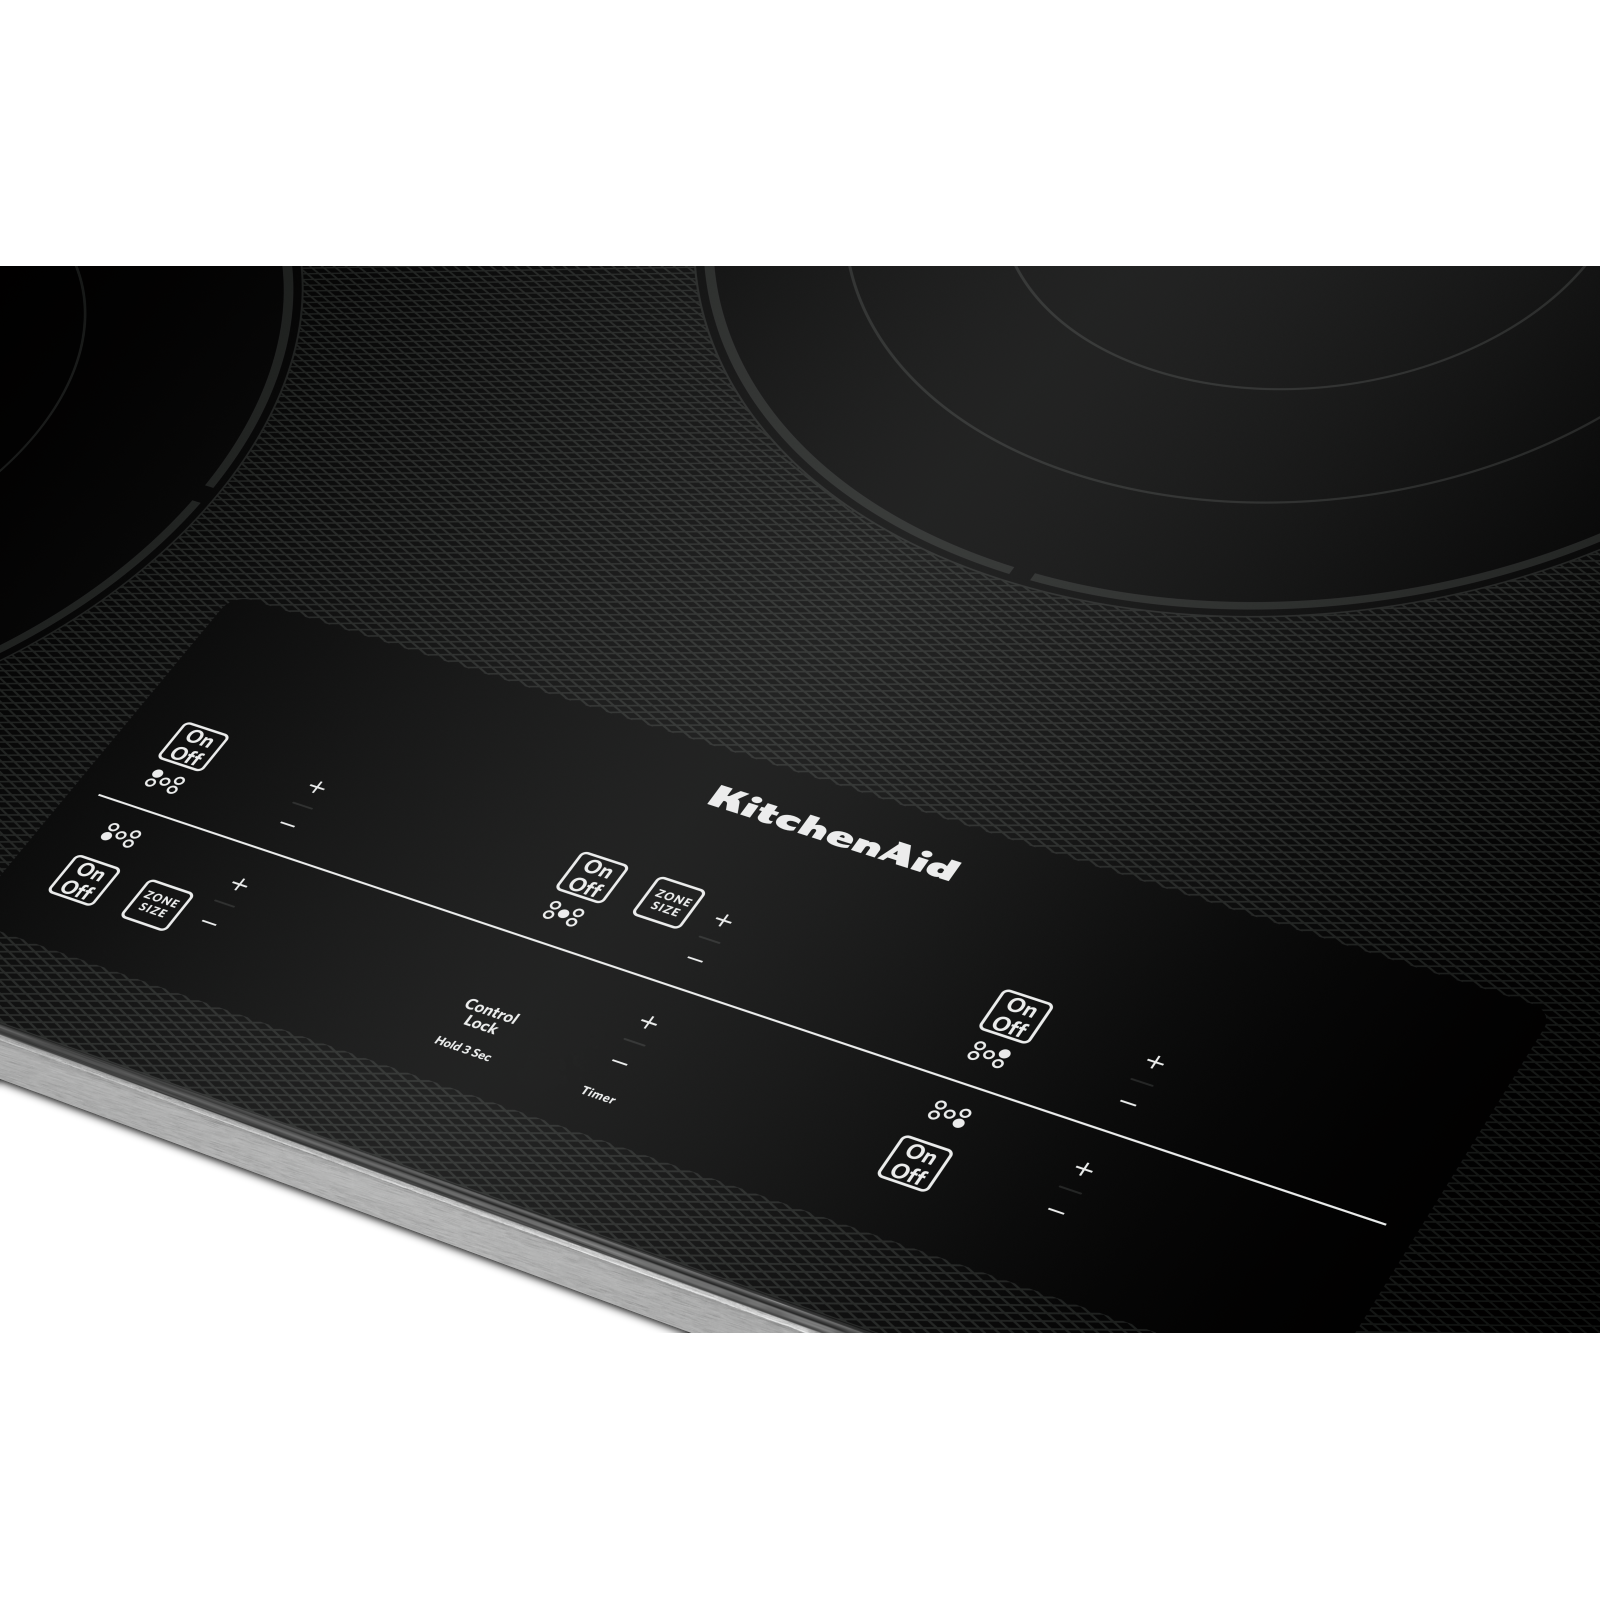 KitchenAid - 34.4 inch wide Electric Cooktop in Stainless - KCES956KSS